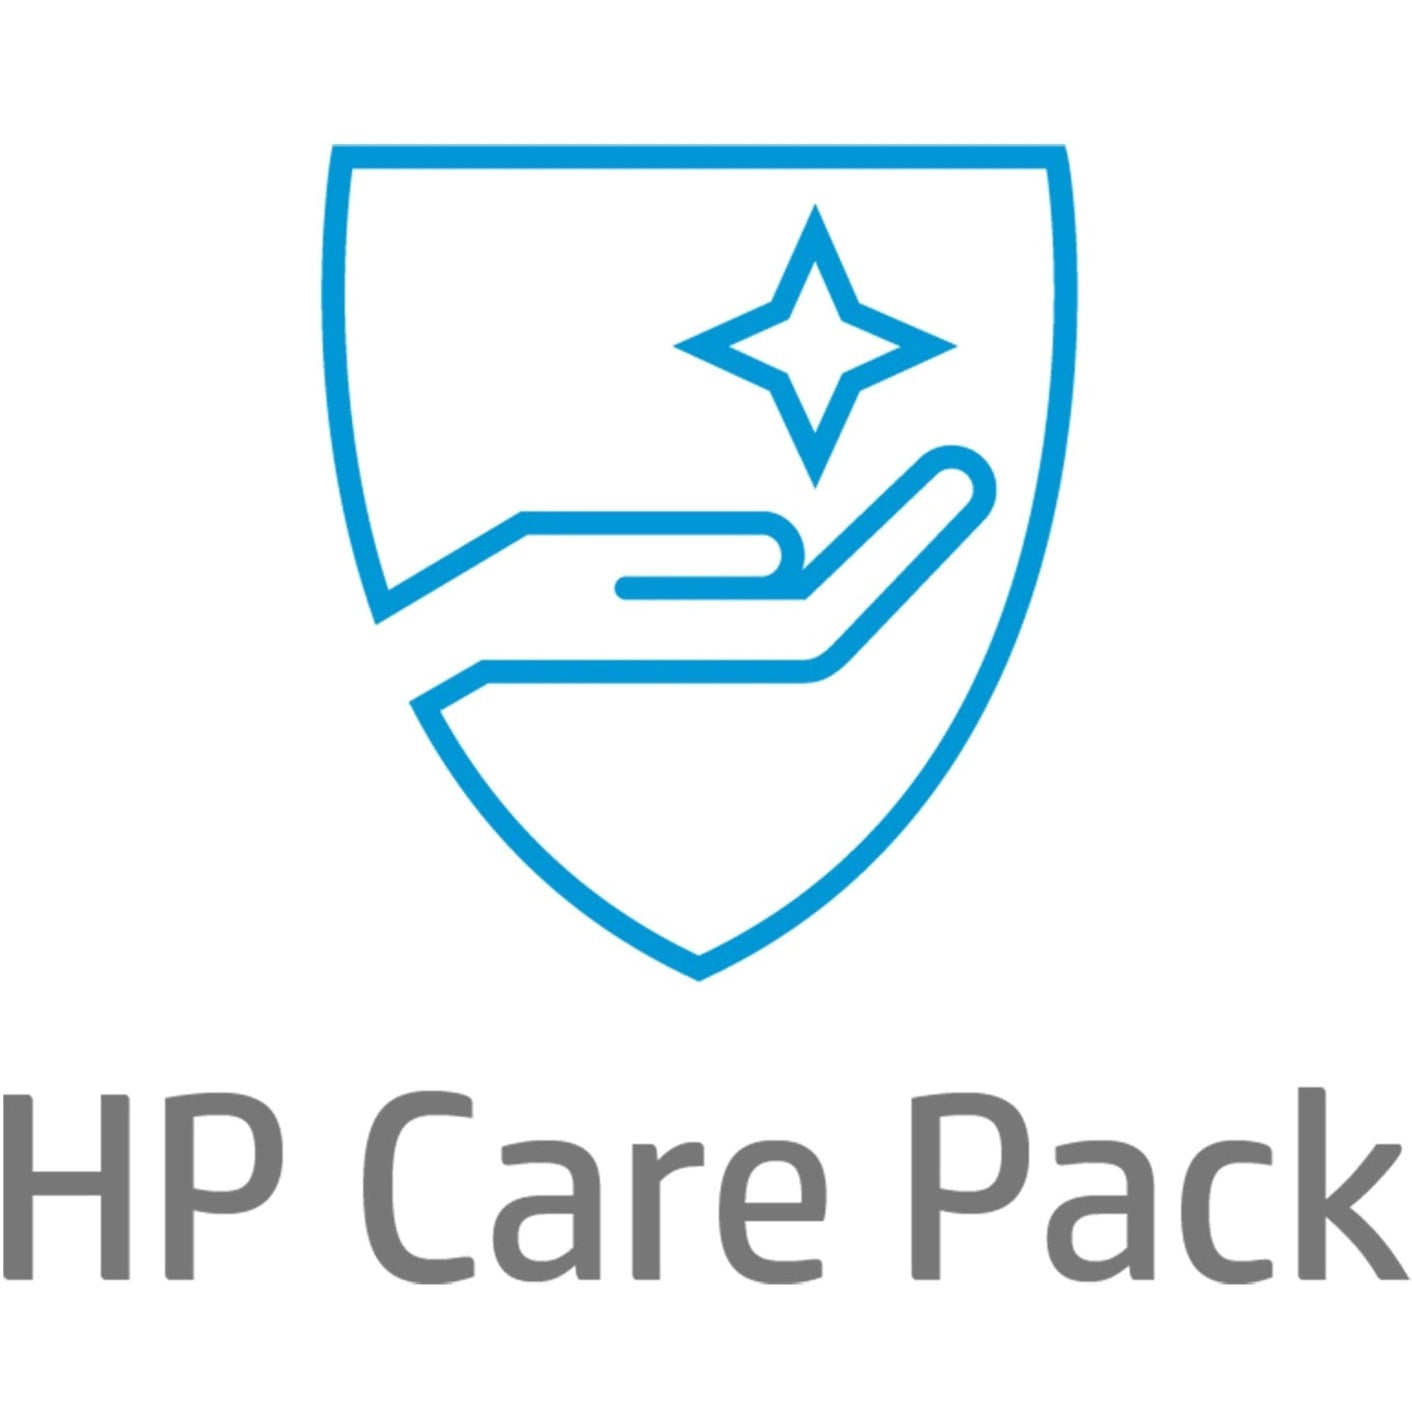 HP Care Pack - Extended Service - 2 Year - Service (UN010E)